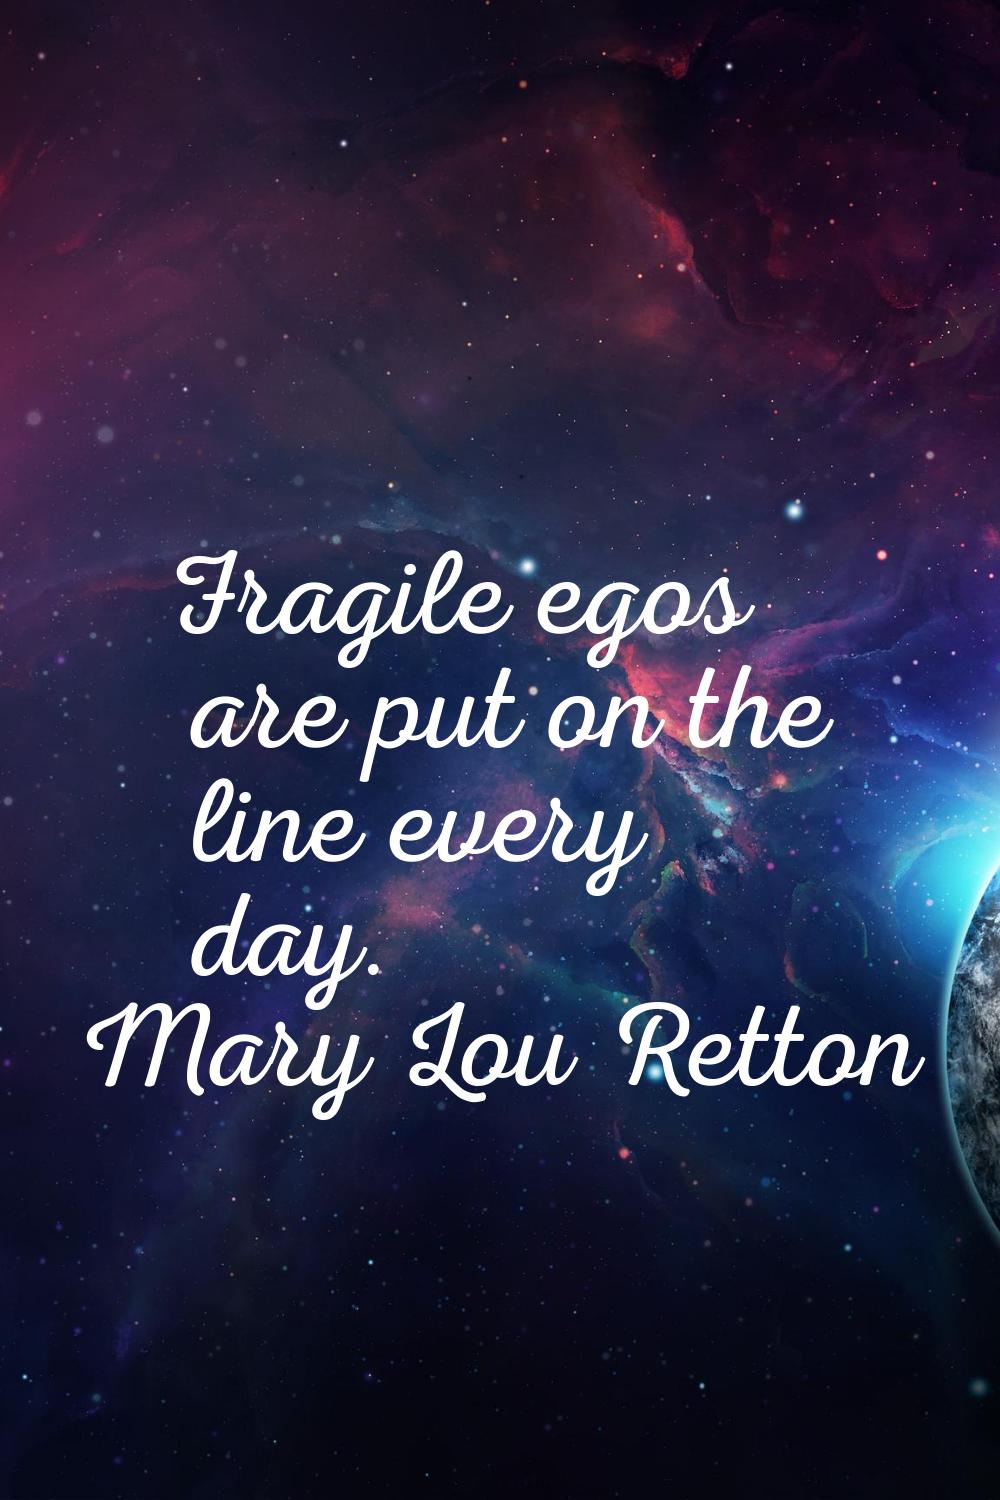 Fragile egos are put on the line every day.